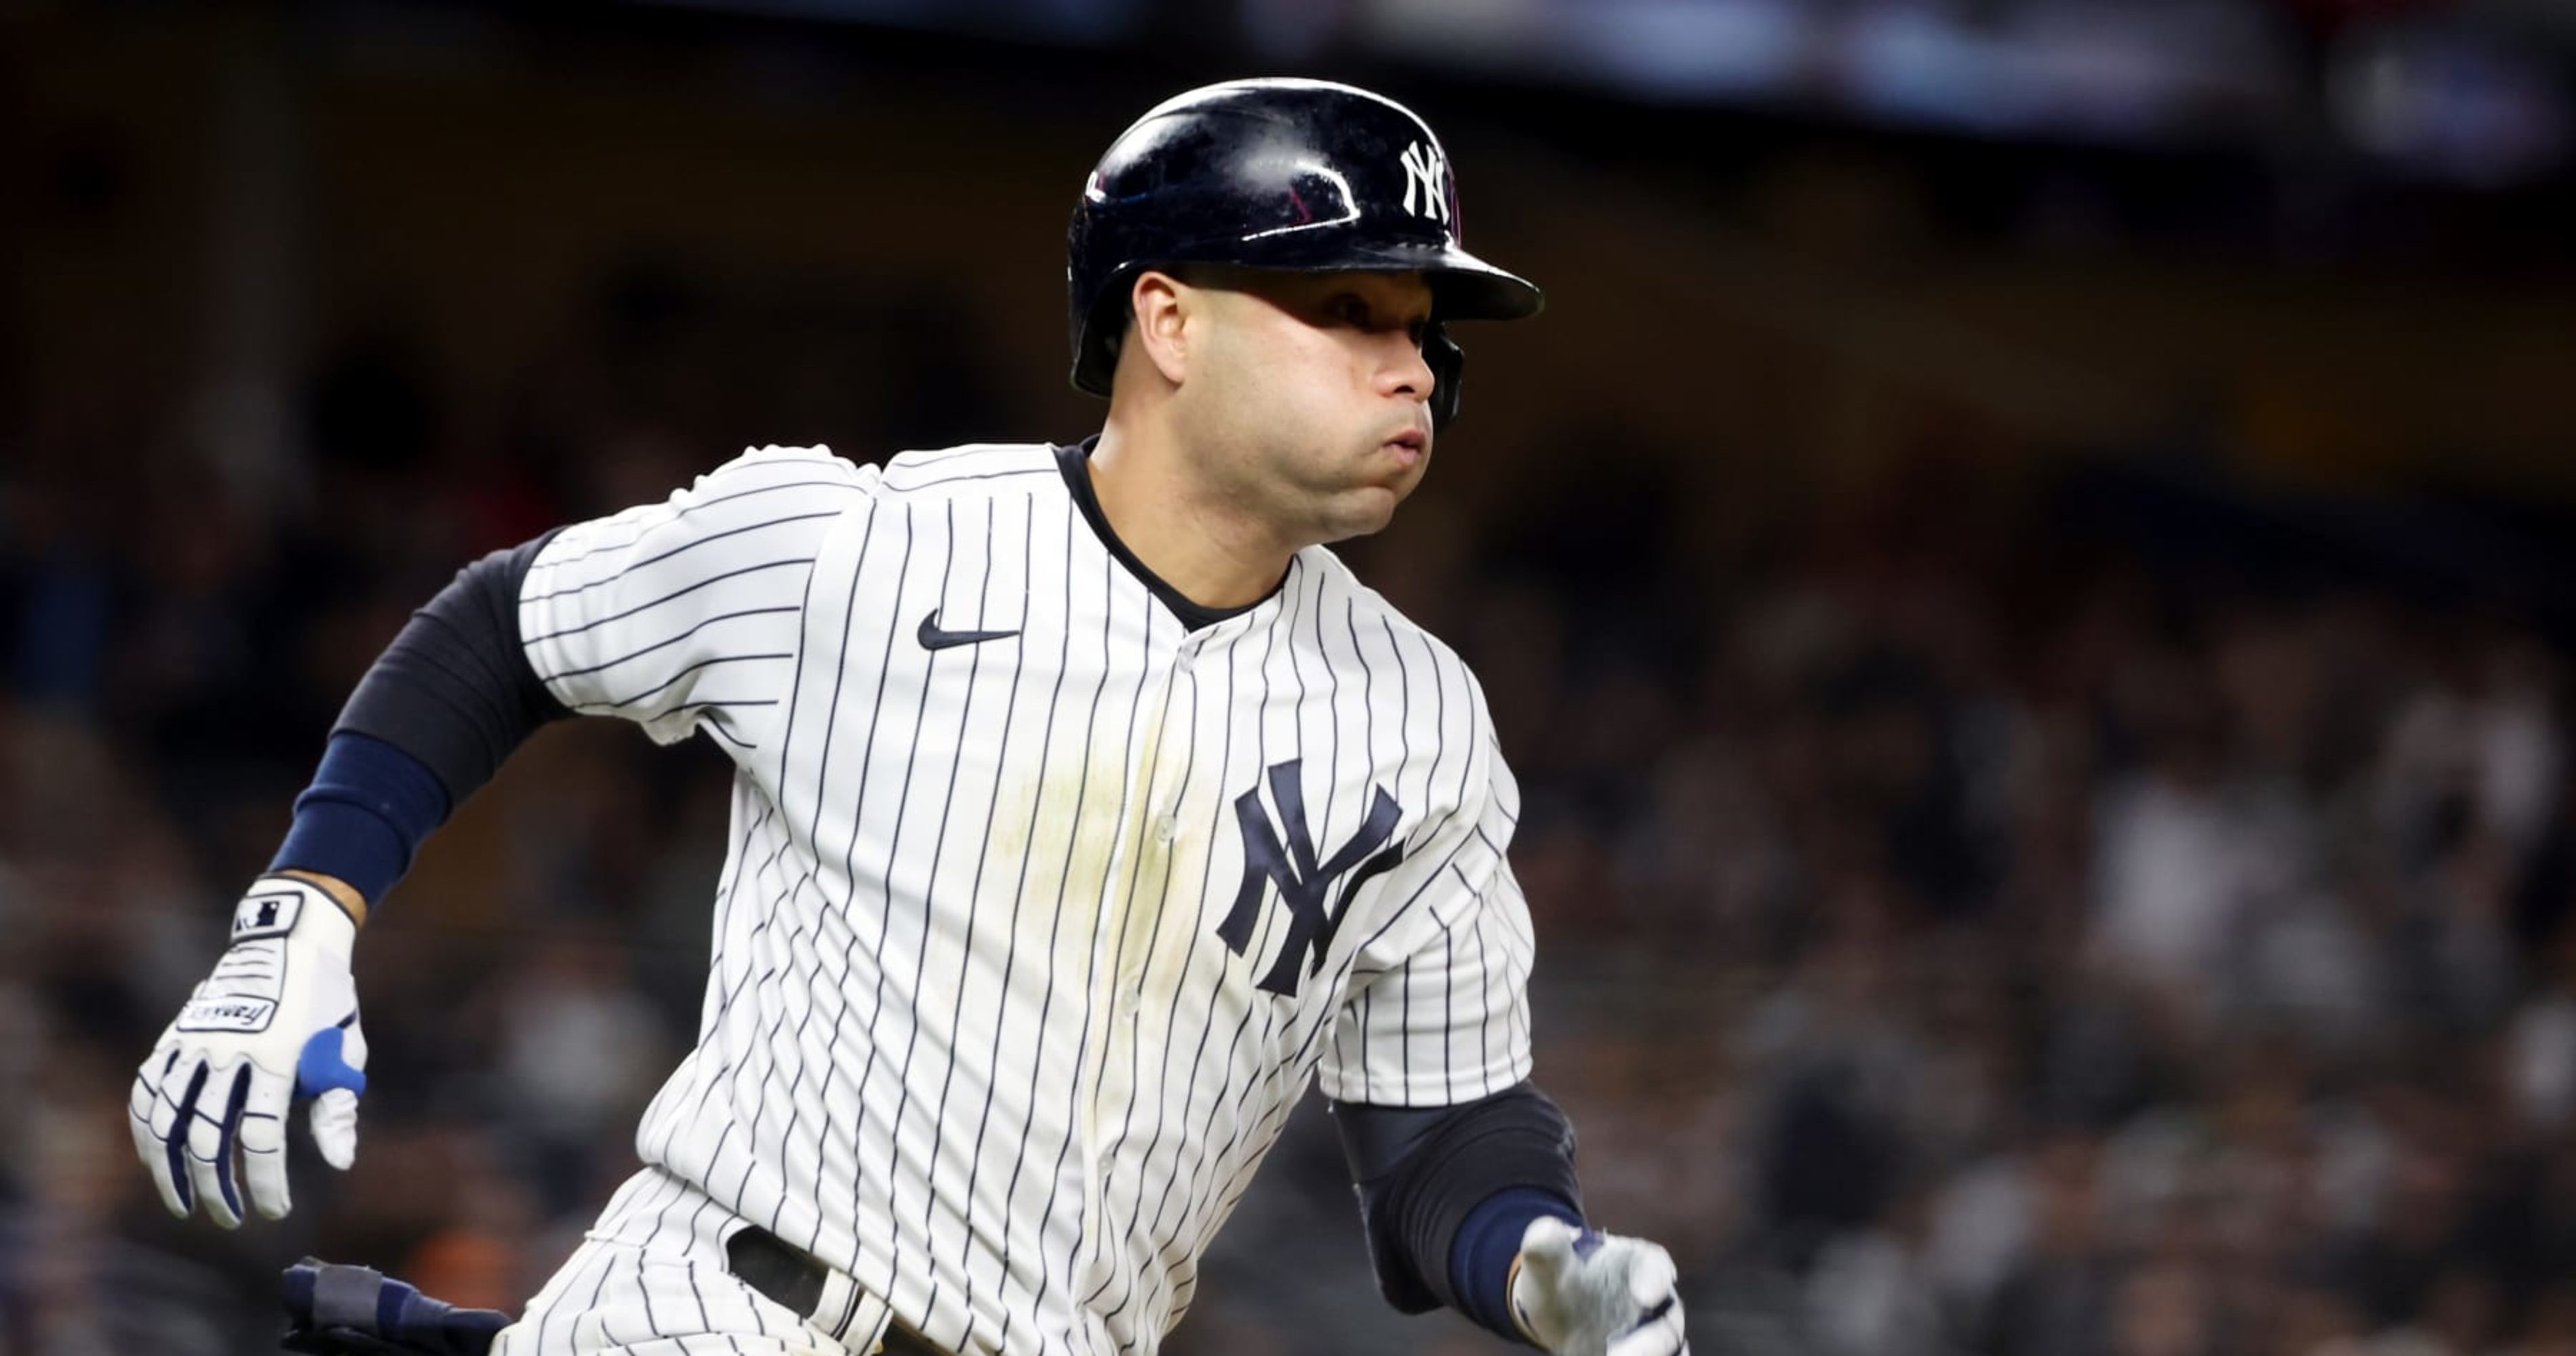 Isiah Kiner-Falefa, Yankees agree to one-year, $6M deal